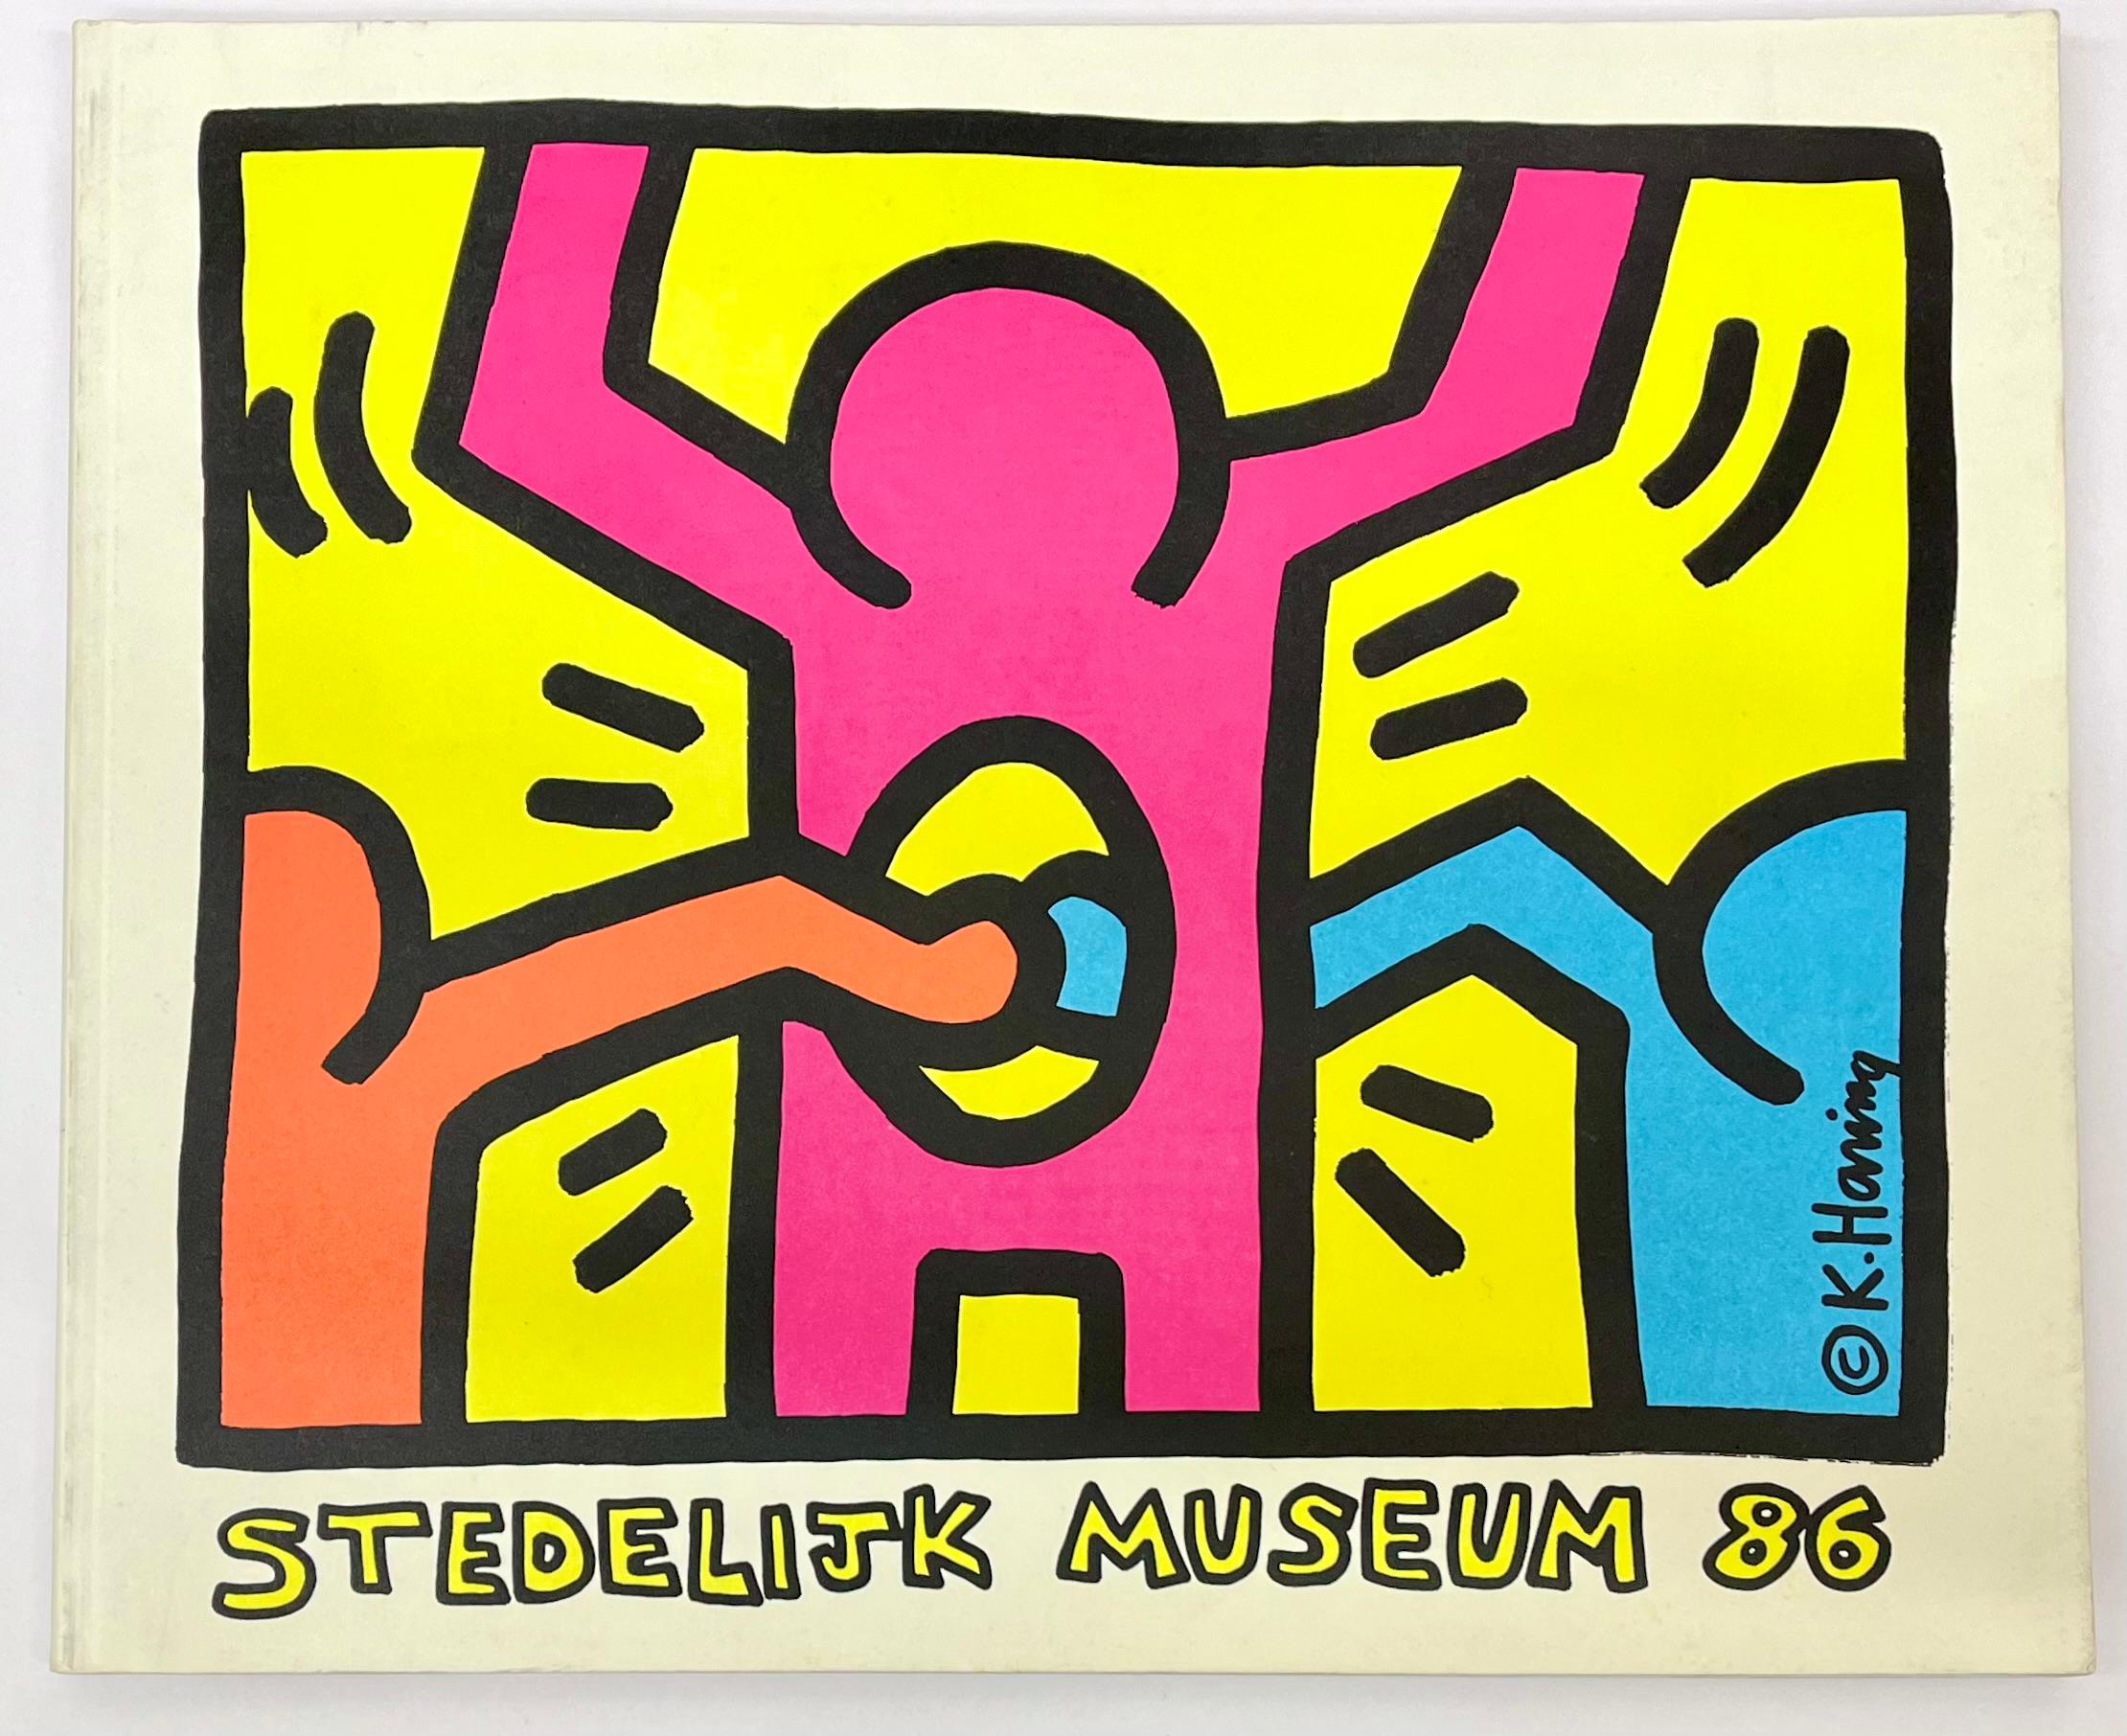 Keith Haring Stedelijk Museum 1986 (Keith Haring 1986 exhibition catalog) For Sale 7